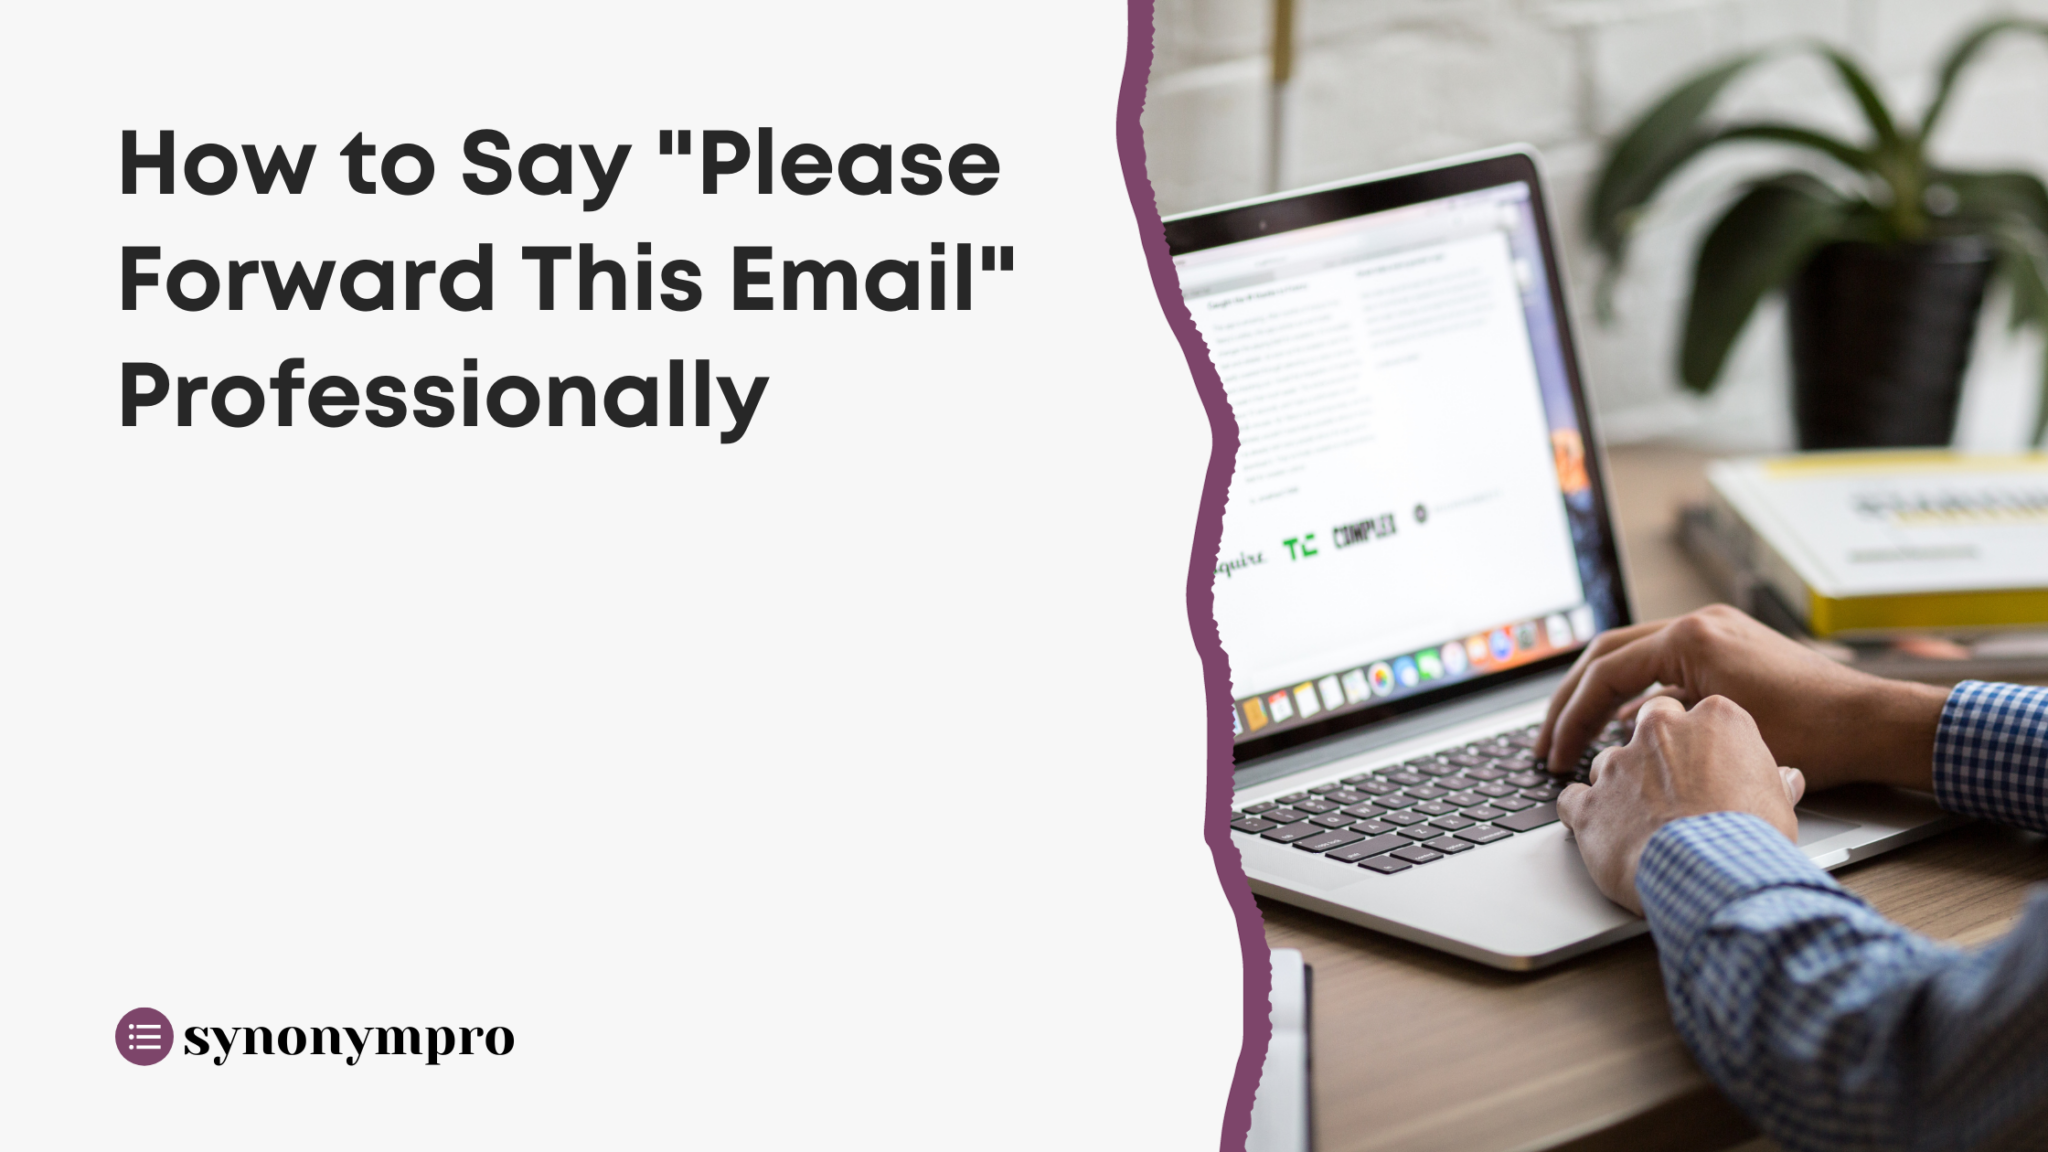 What Is Another Way to Say “Please Forward This Email”? - SynonymPro